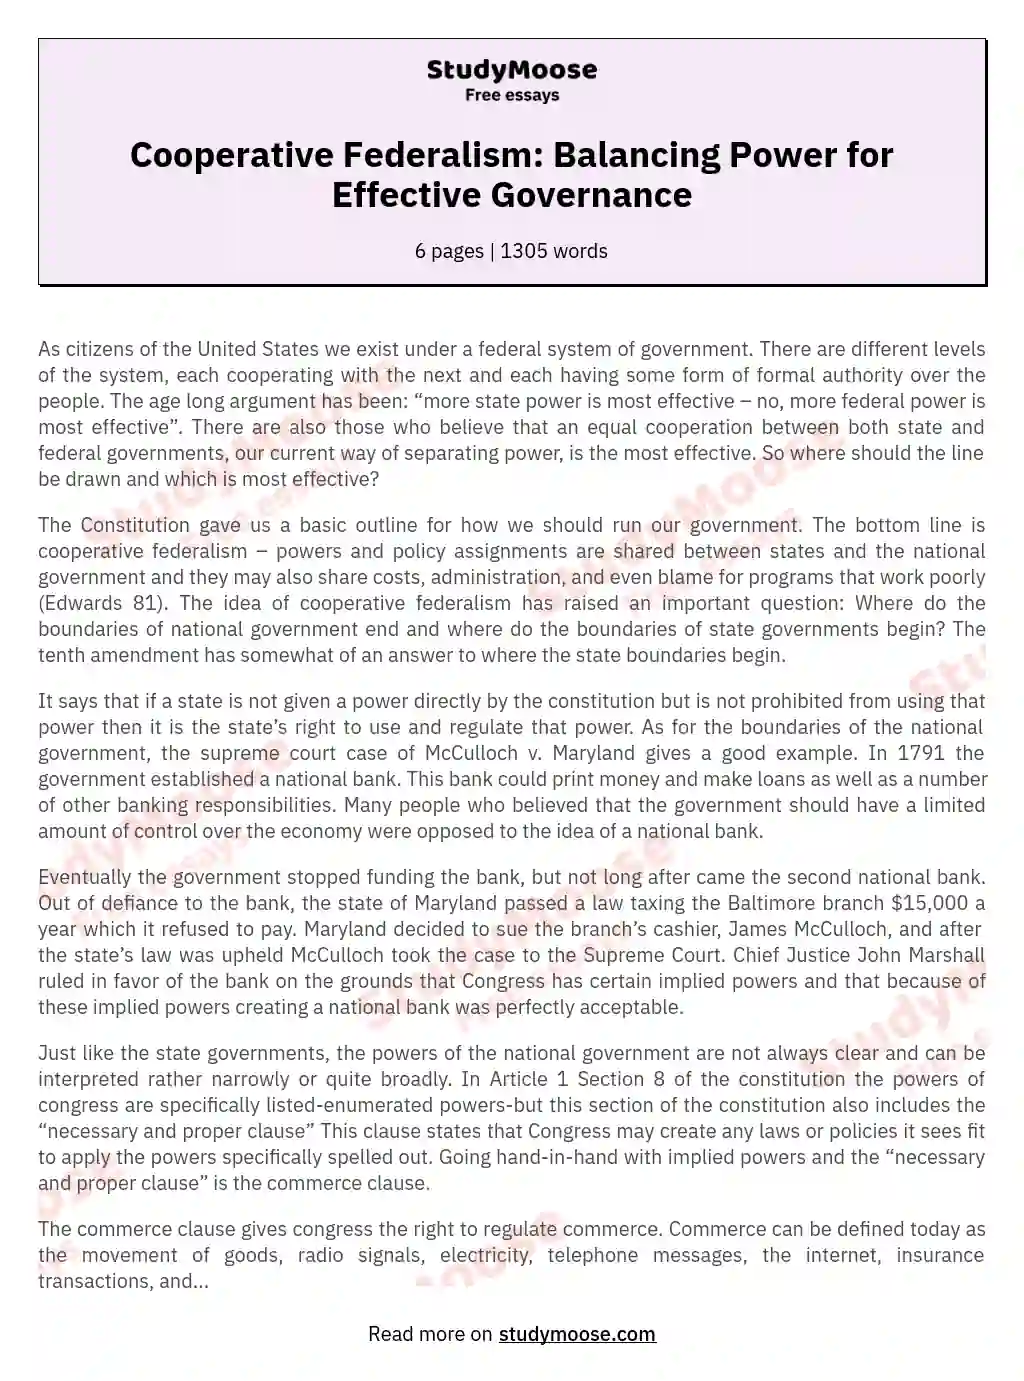 Cooperative Federalism: Balancing Power for Effective Governance essay